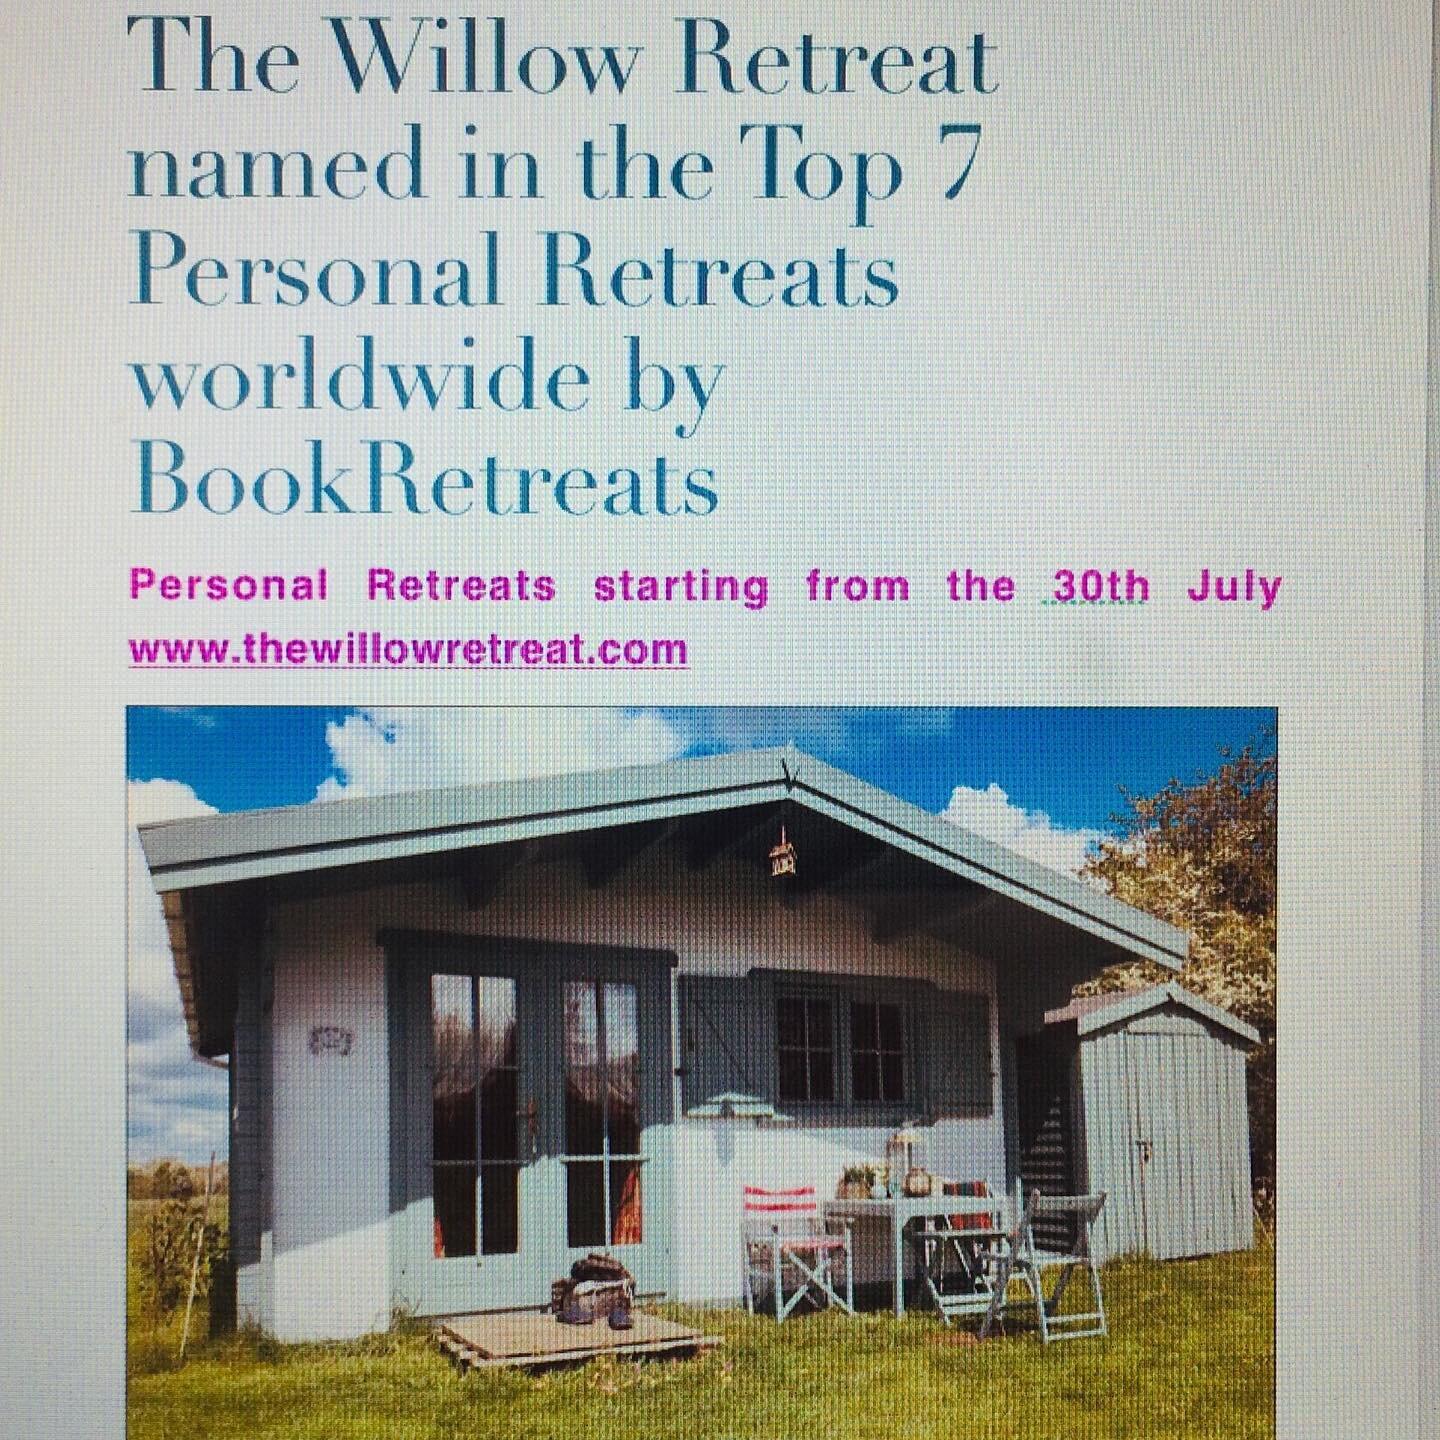 The Willow Retreat was named in the Top 7 Personal Retreats worldwide by BookRetreats back in March days before the Covid put a halt to life for awhile. Private retreats are starting back from the 30th July. See you soon. www.thewillowretreat.com 

#